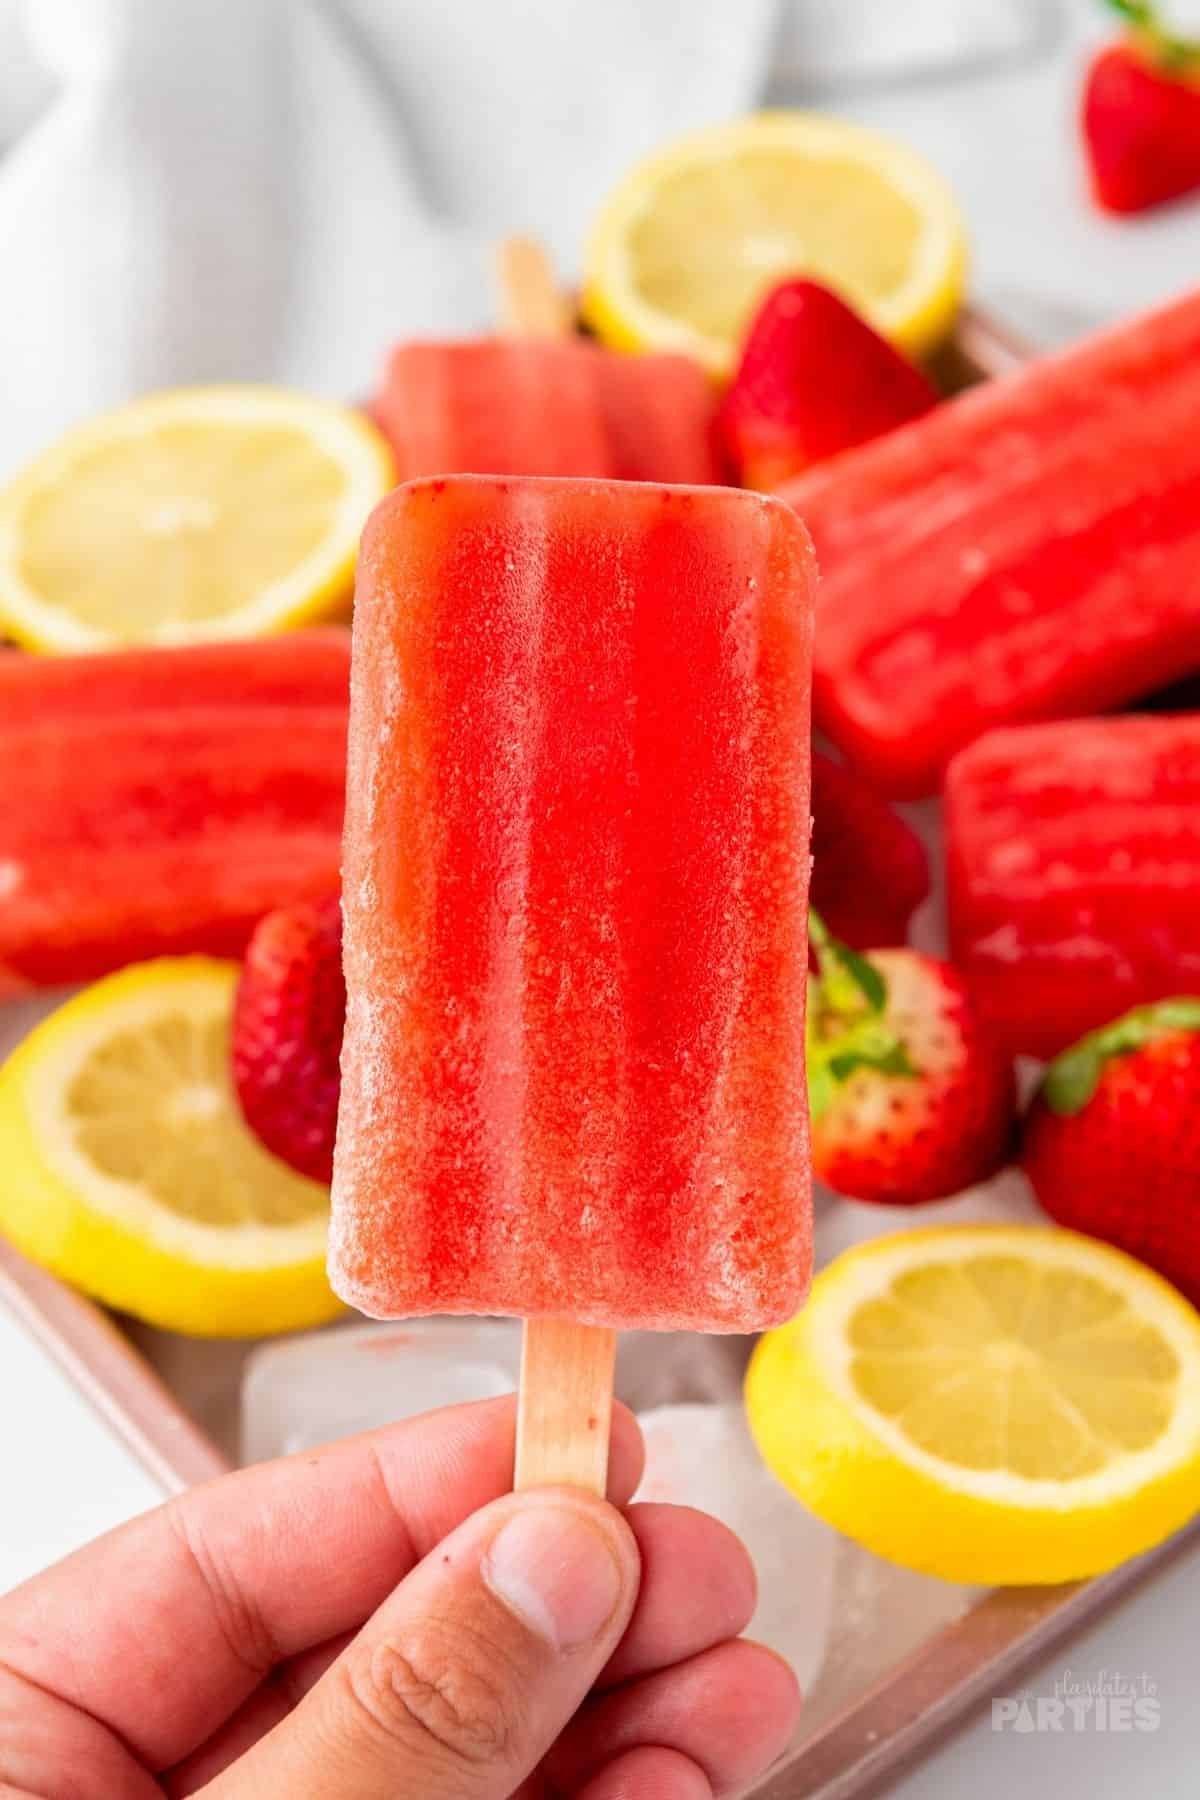 A woman's hand holds a red homemade popsicle.